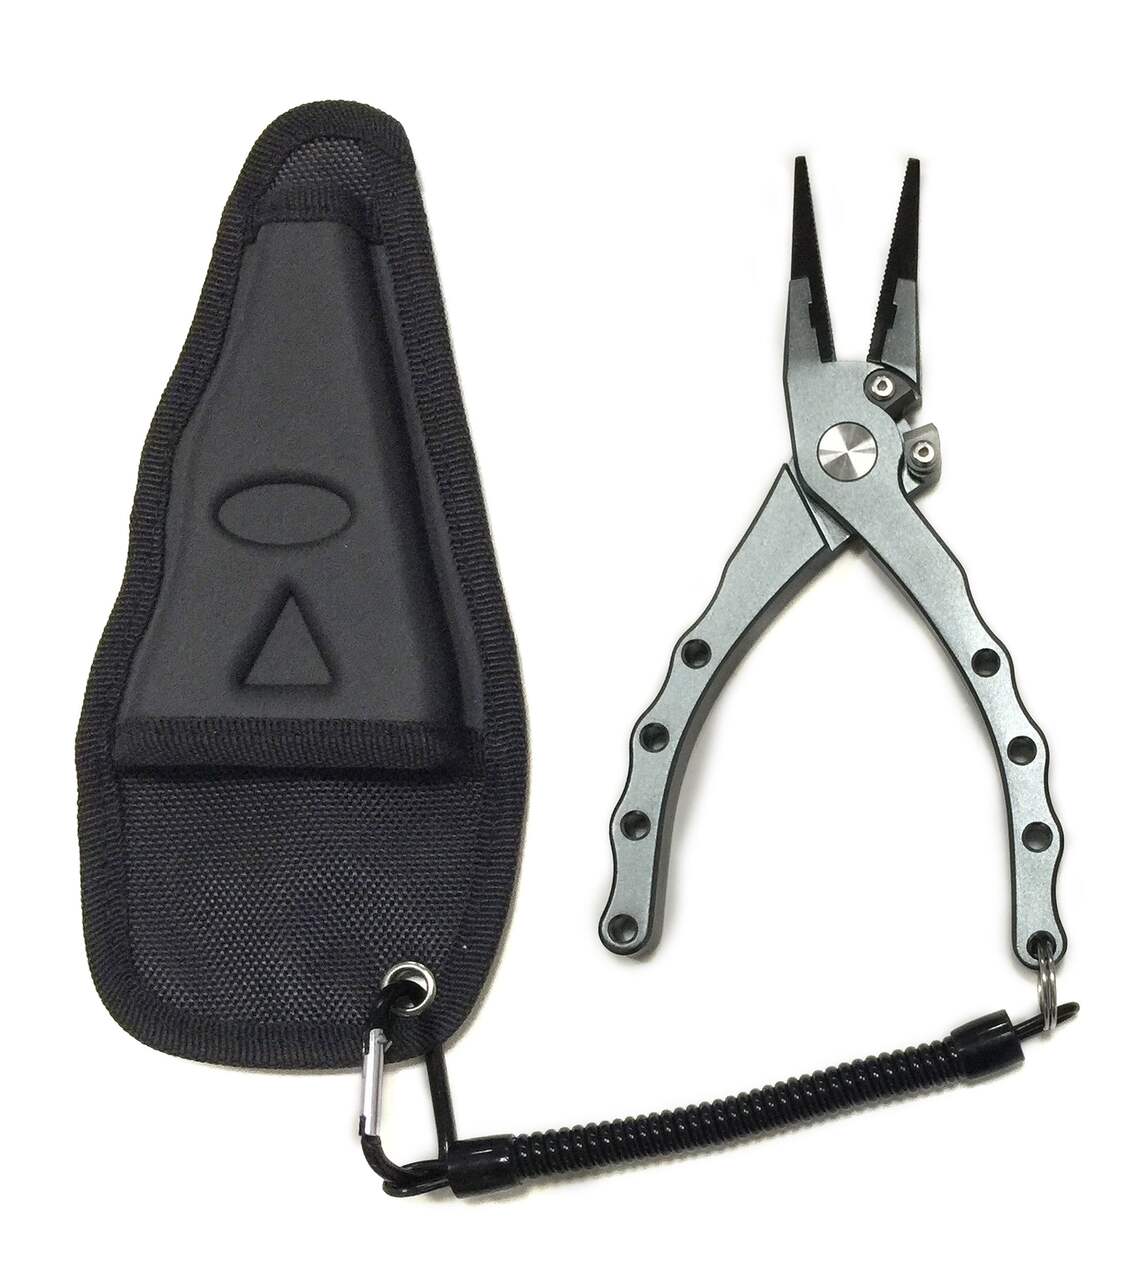 https://media-www.canadiantire.ca/product/playing/fishing/fishing-accessories/0777513/xcalibur-aluminum-pliers-with-sheath-7-5--d1d825a0-a306-4e22-b566-bad8ee01d859-jpgrendition.jpg?imdensity=1&imwidth=1244&impolicy=mZoom